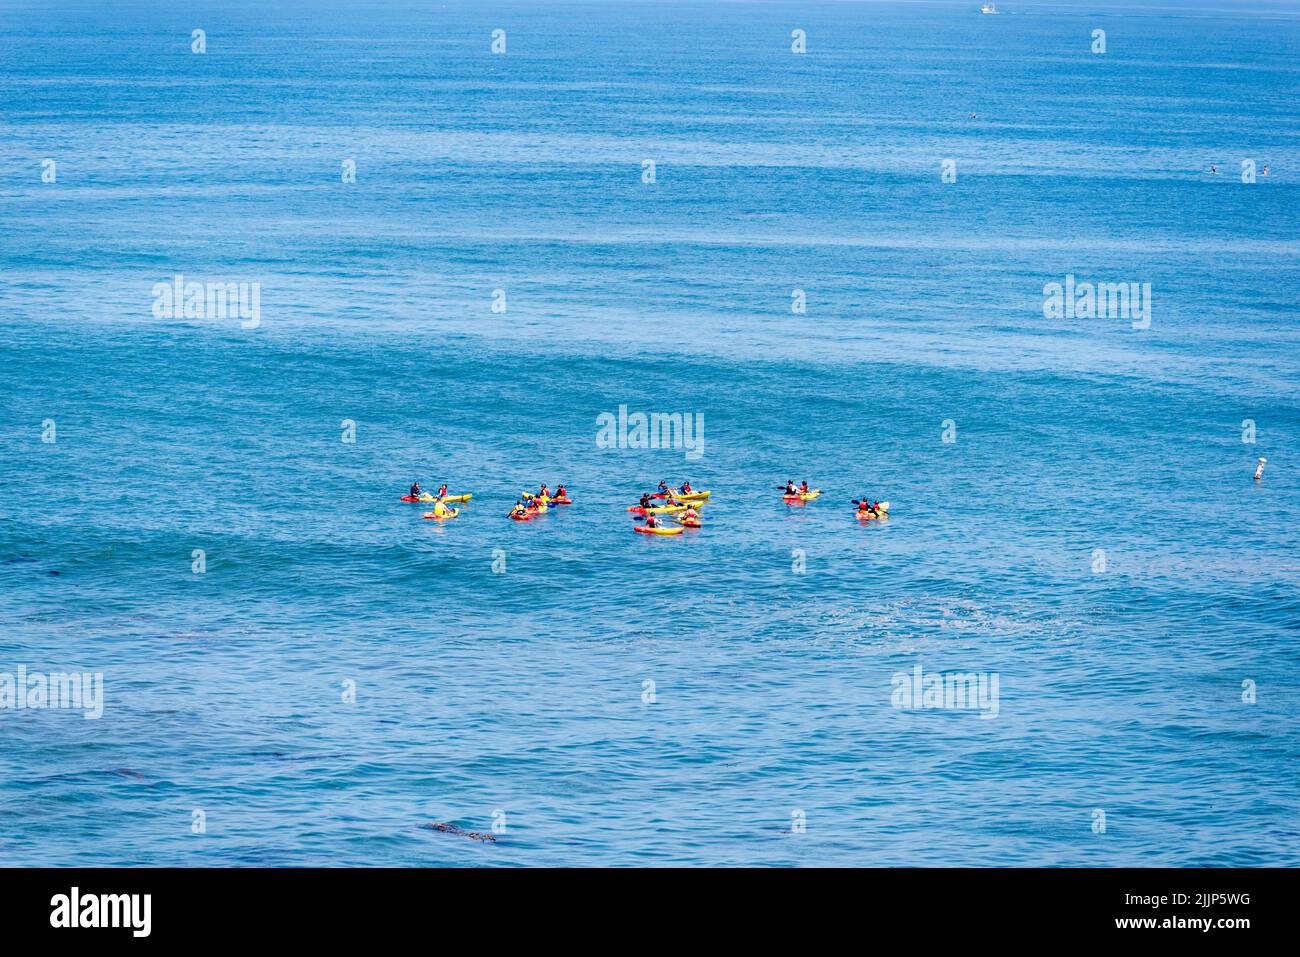 A group of kayakers in the ocean. La Jolla, San Diego, California, USA. Stock Photo